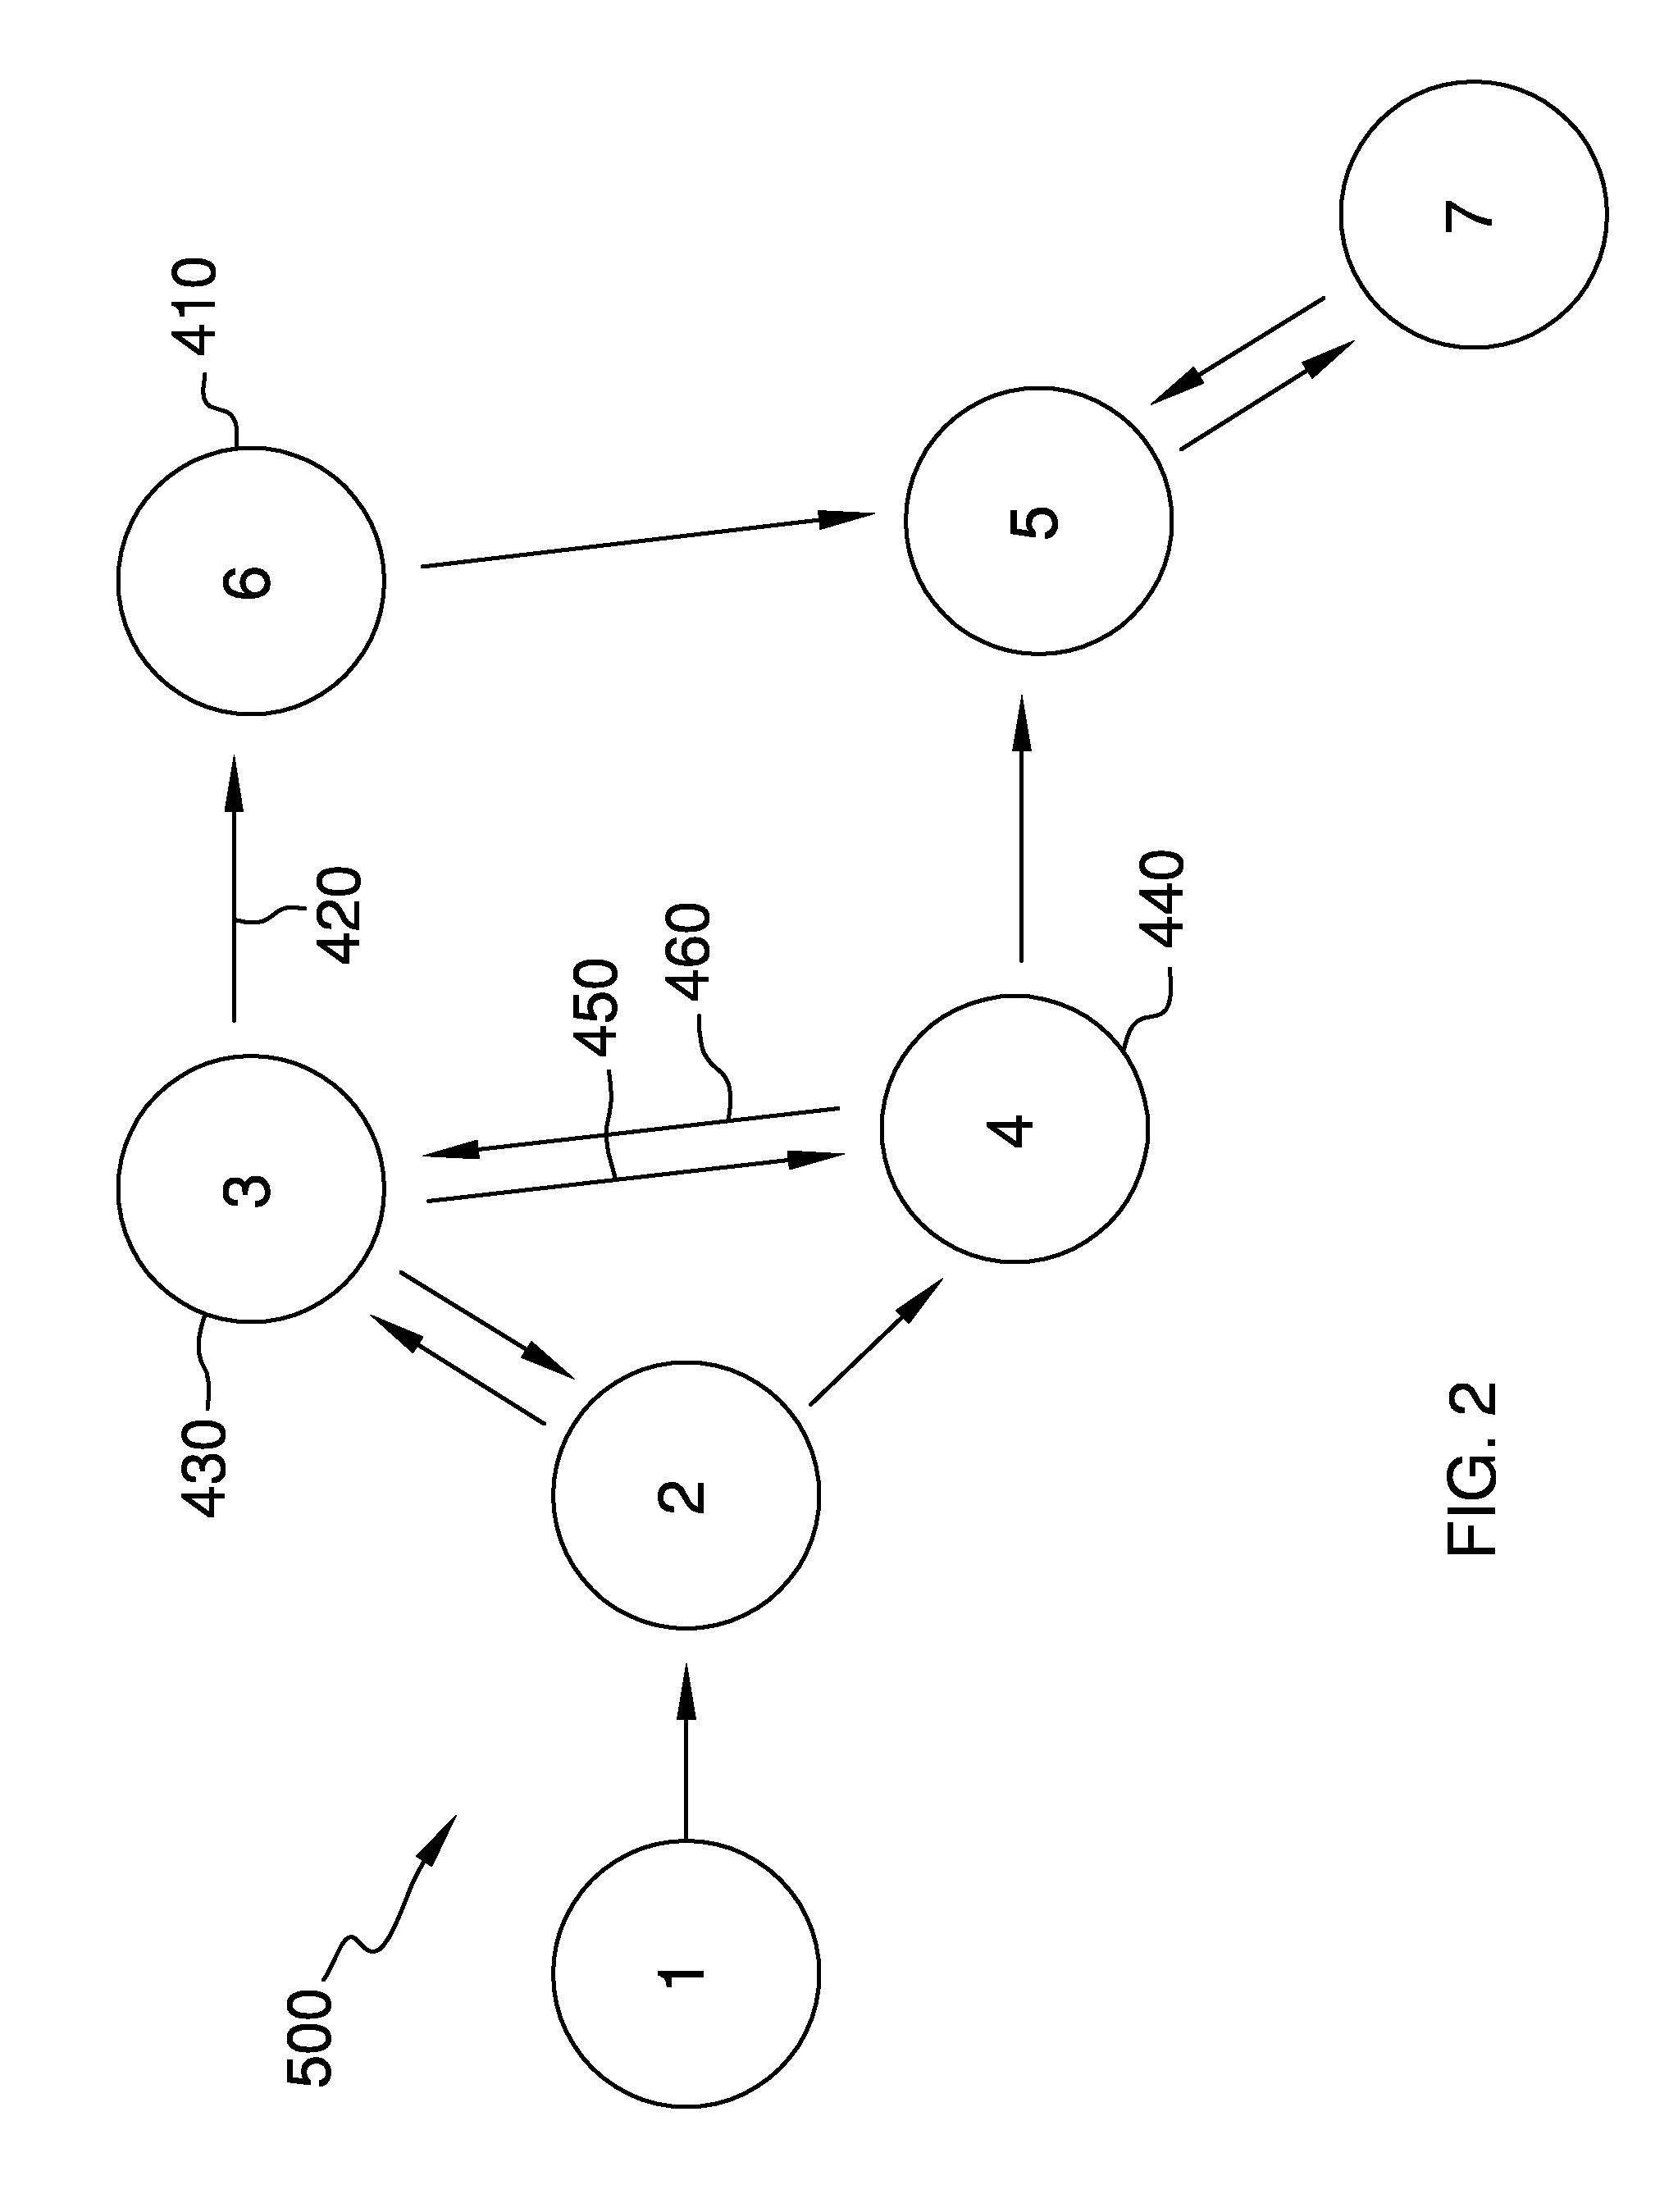 System and method for network service path analysis